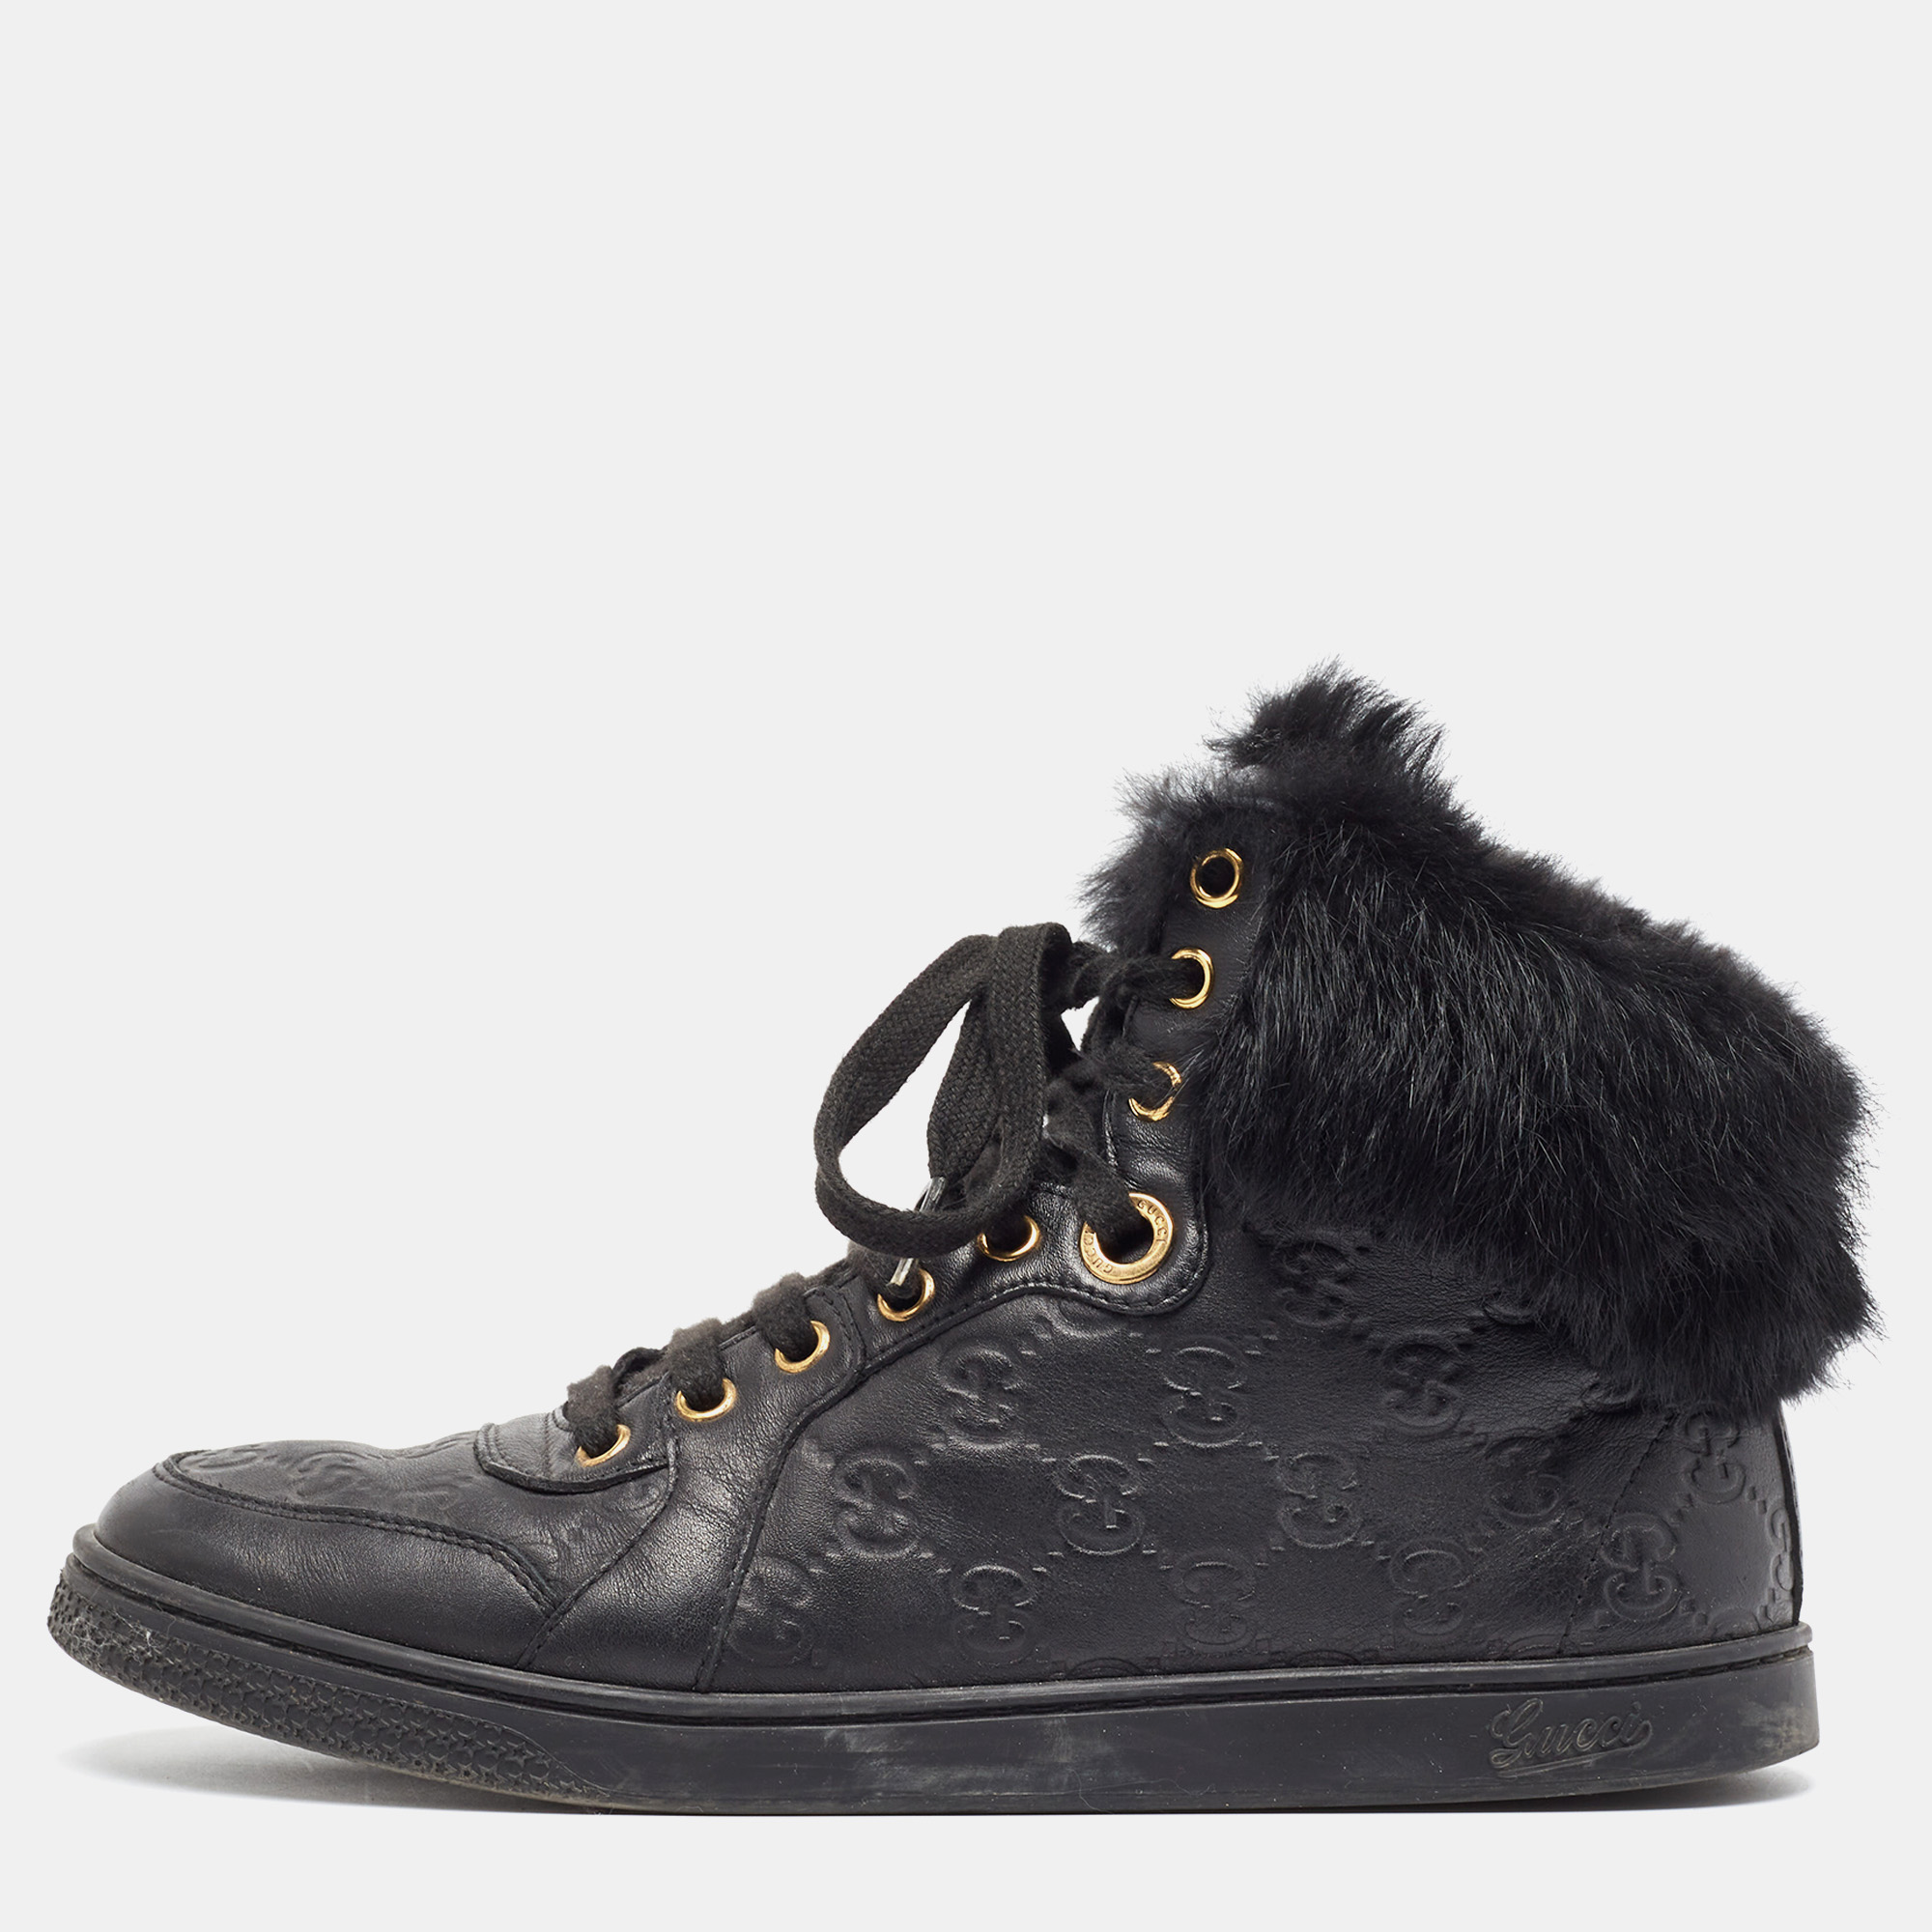 

Gucci Black Guccissima Leather and Fur Trim Cada High Top Sneakers Size